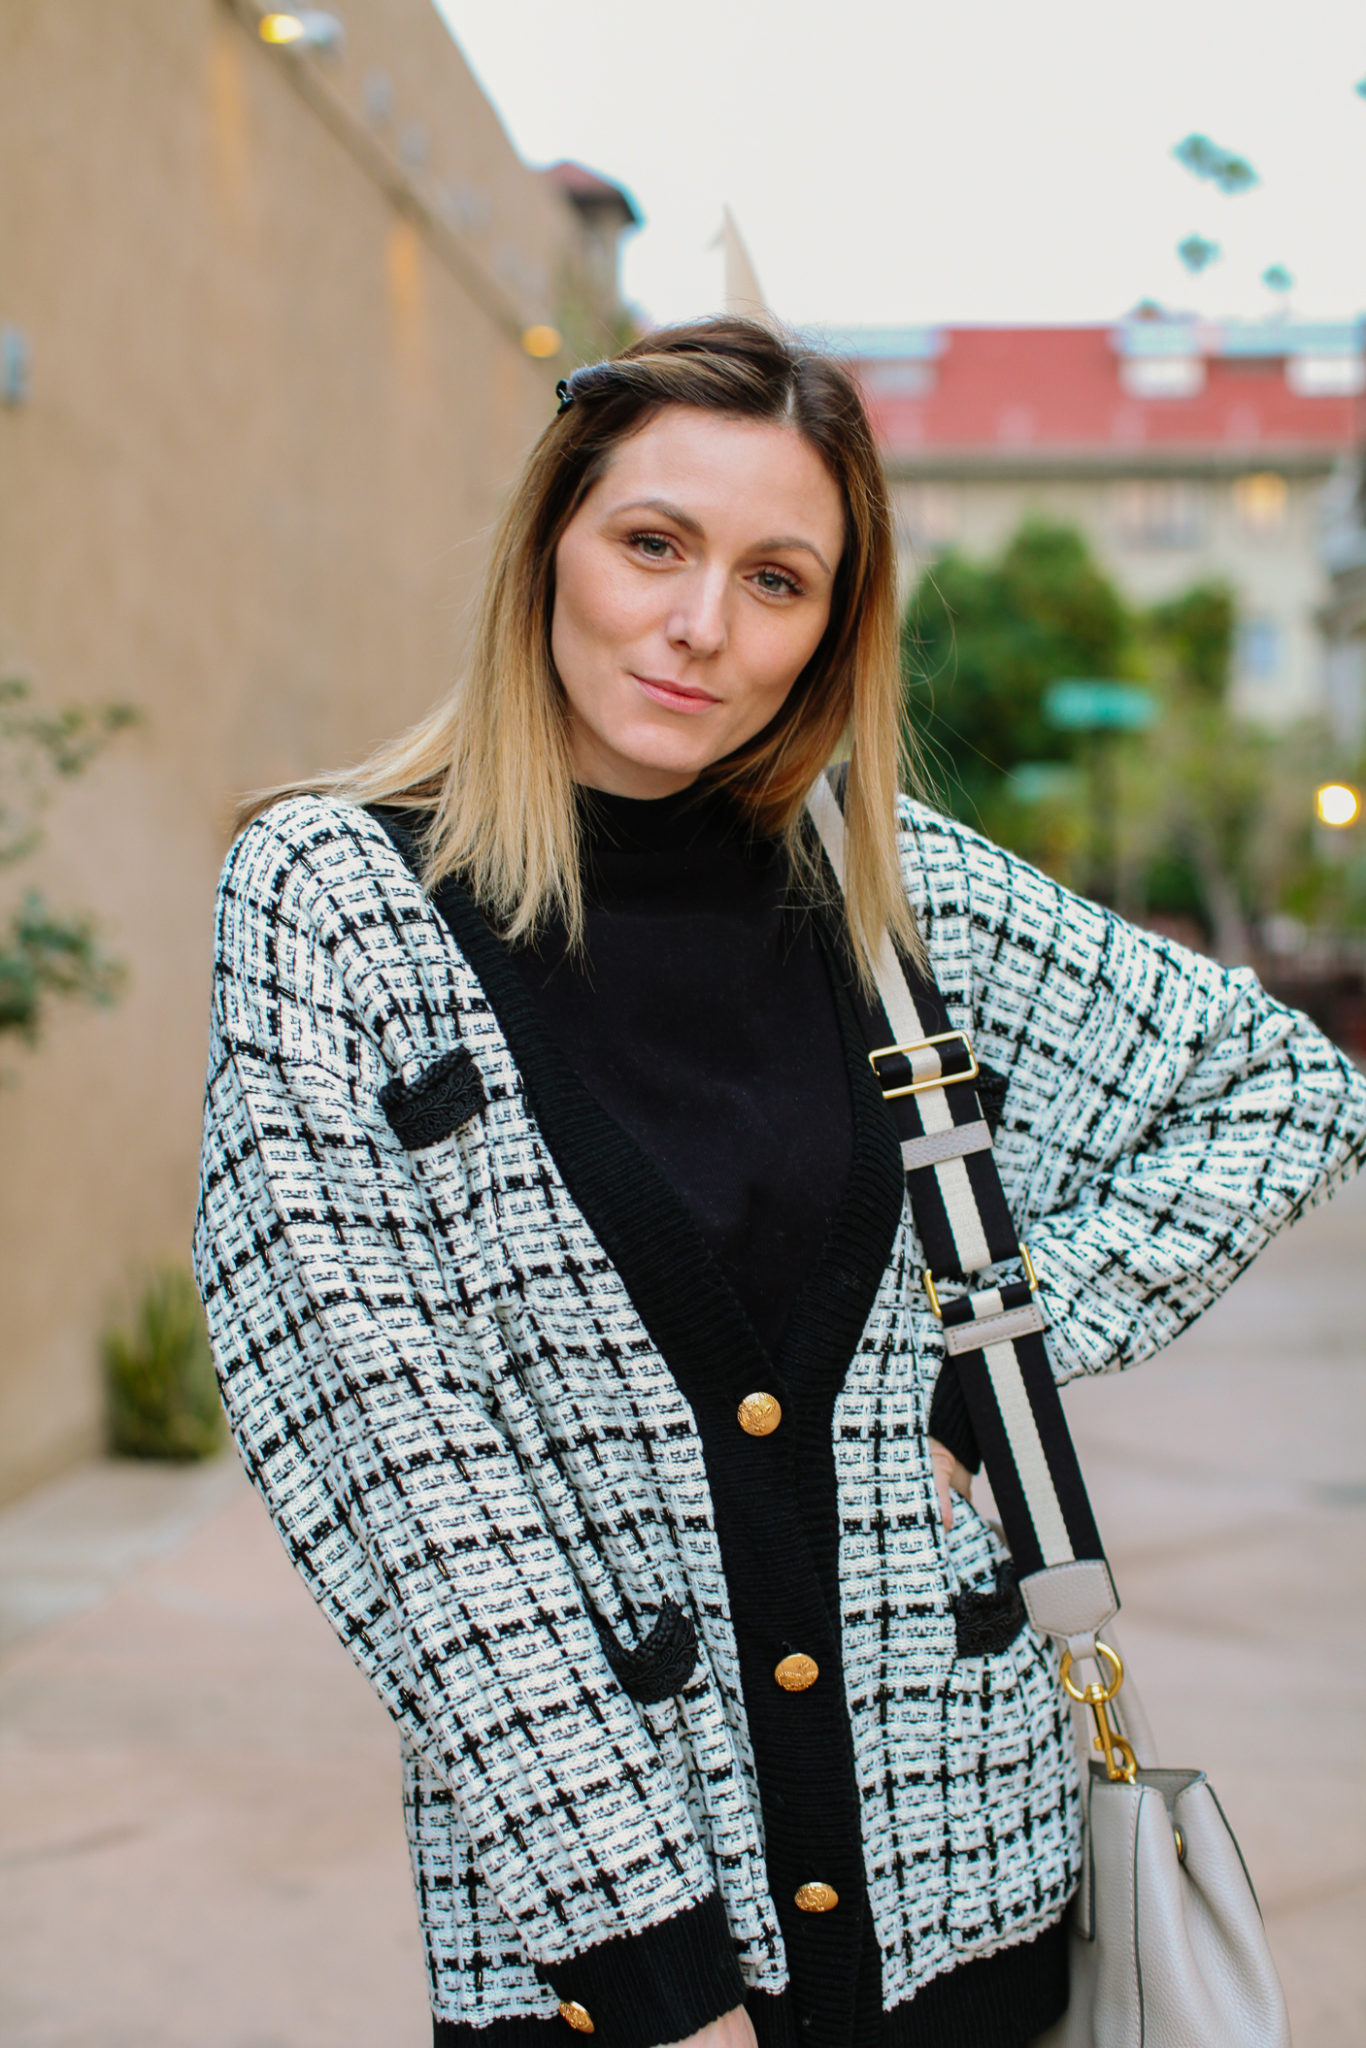 How to wear a cardigan without looking frumpy, tips featured by top L.A. fashion blog, Tea Cups & Tulips: image of a woman wearing a SheIn plaid cardigan